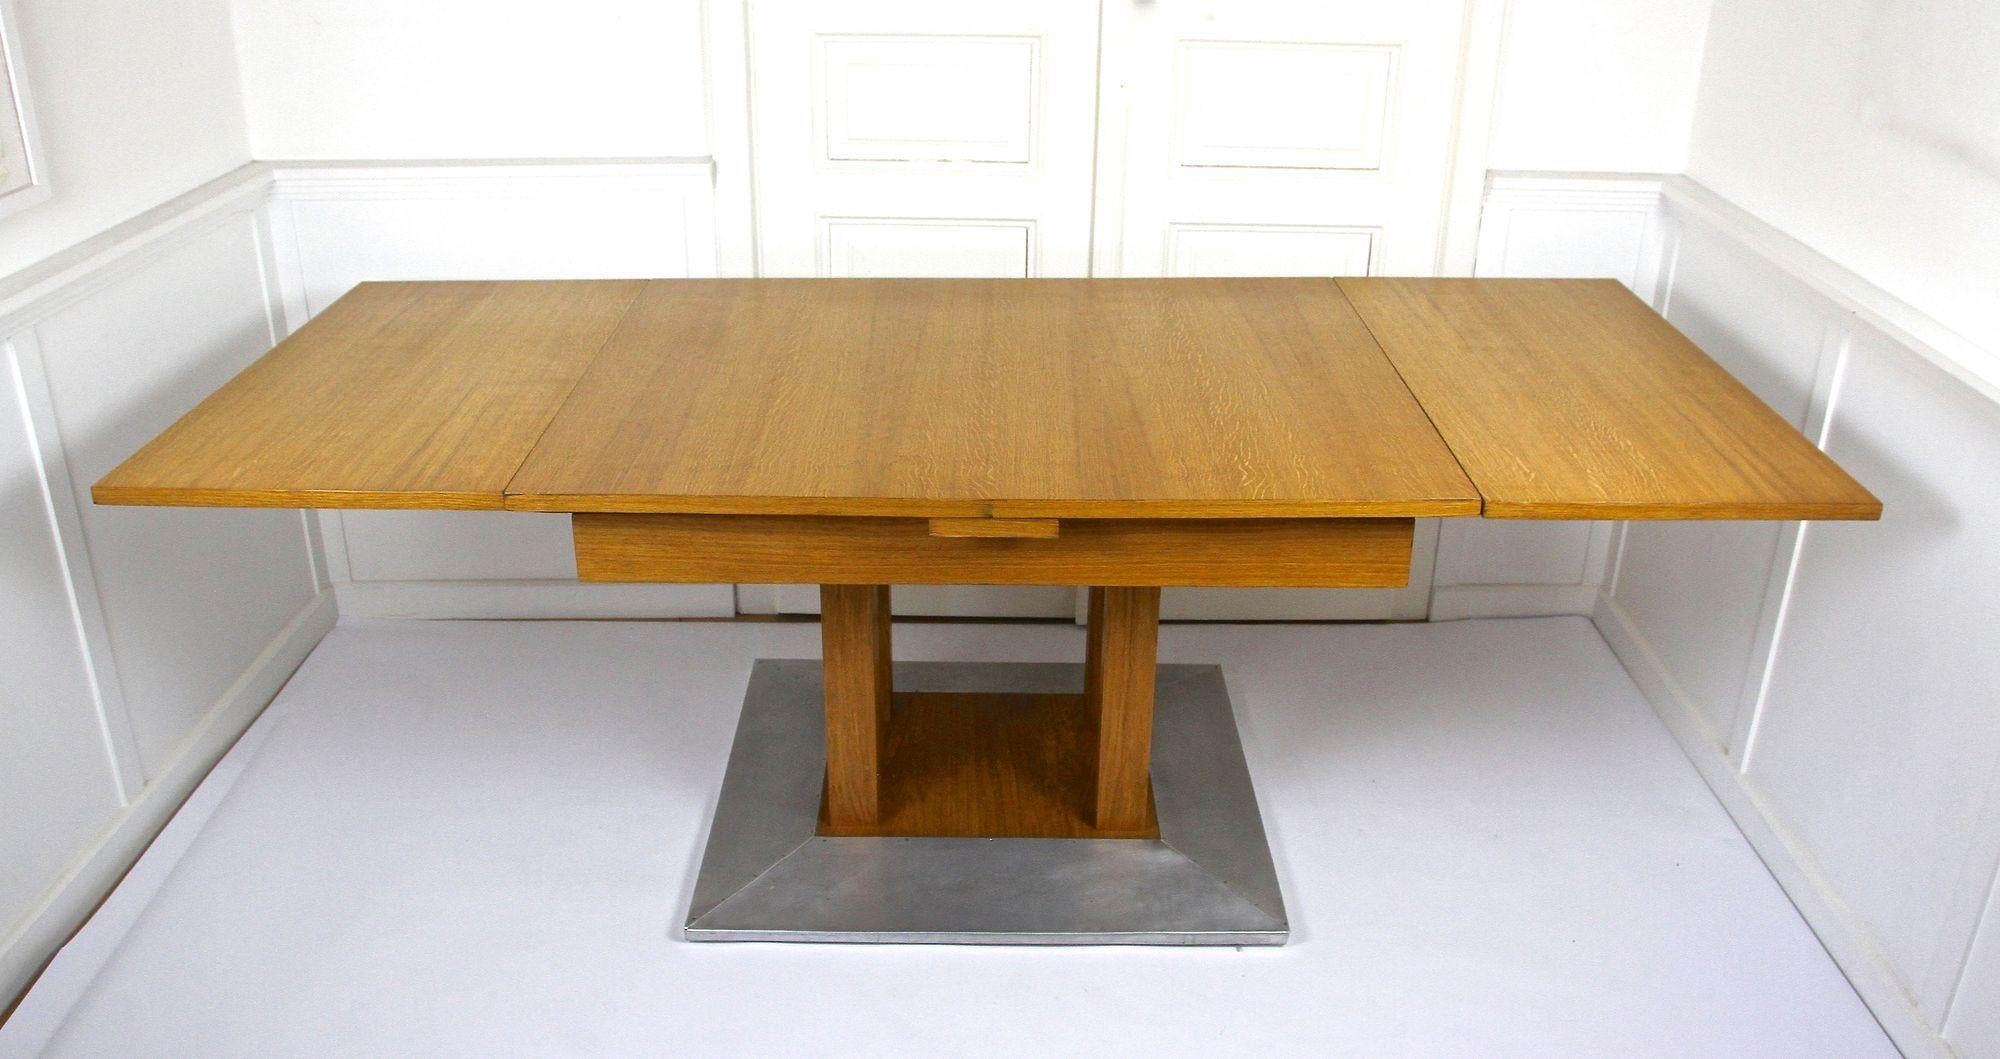 Austrian 20th Century Extendable Oakwood Dining Table by Josef Hoffmann, AT ca. 1905 For Sale